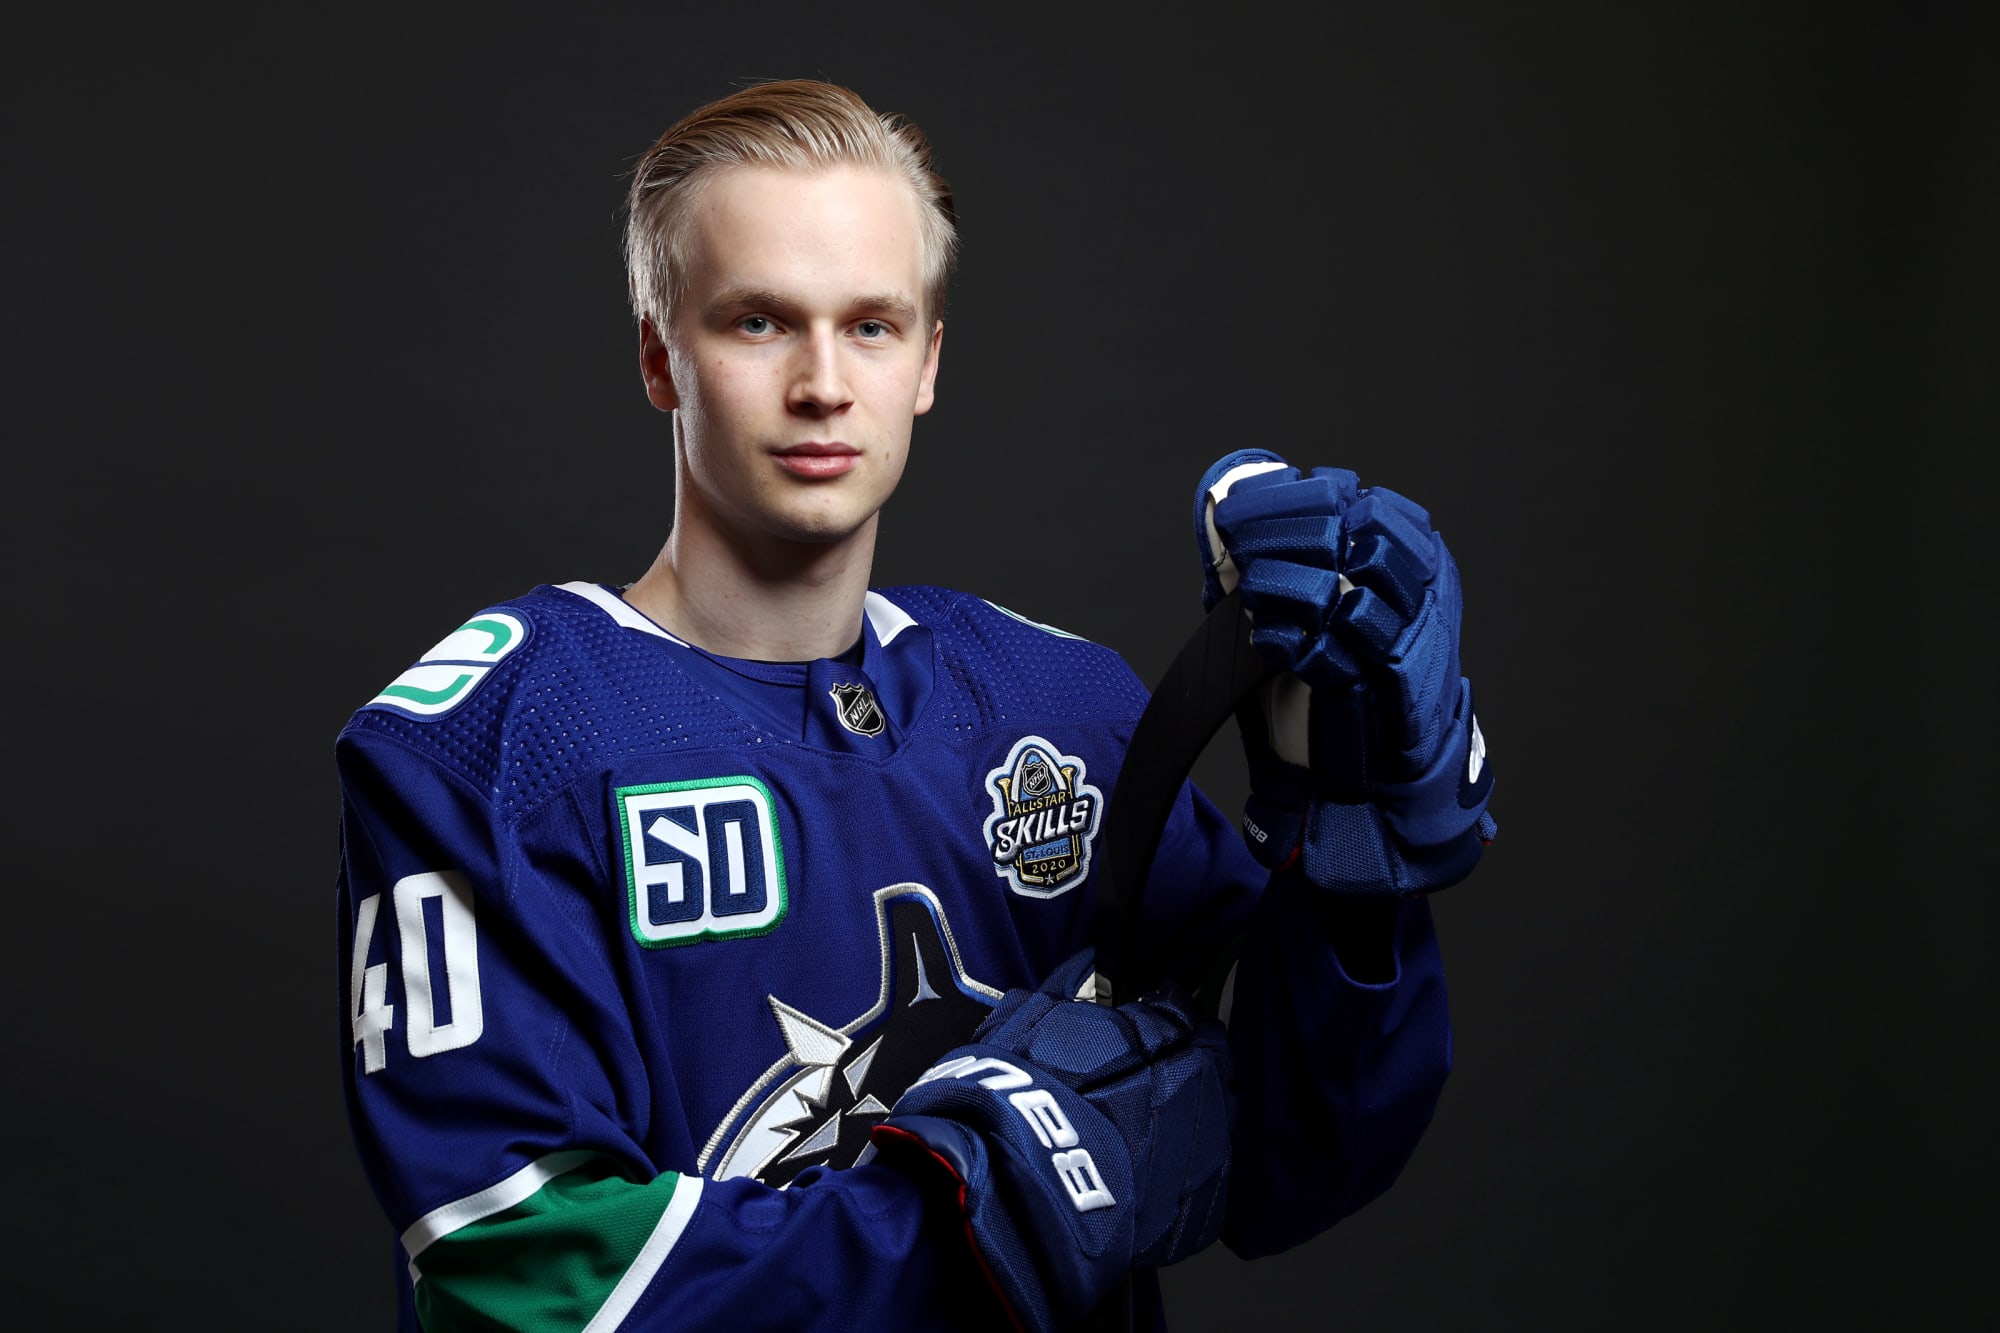 Vancouver Canucks: Elias Pettersson is the new face of the franchise